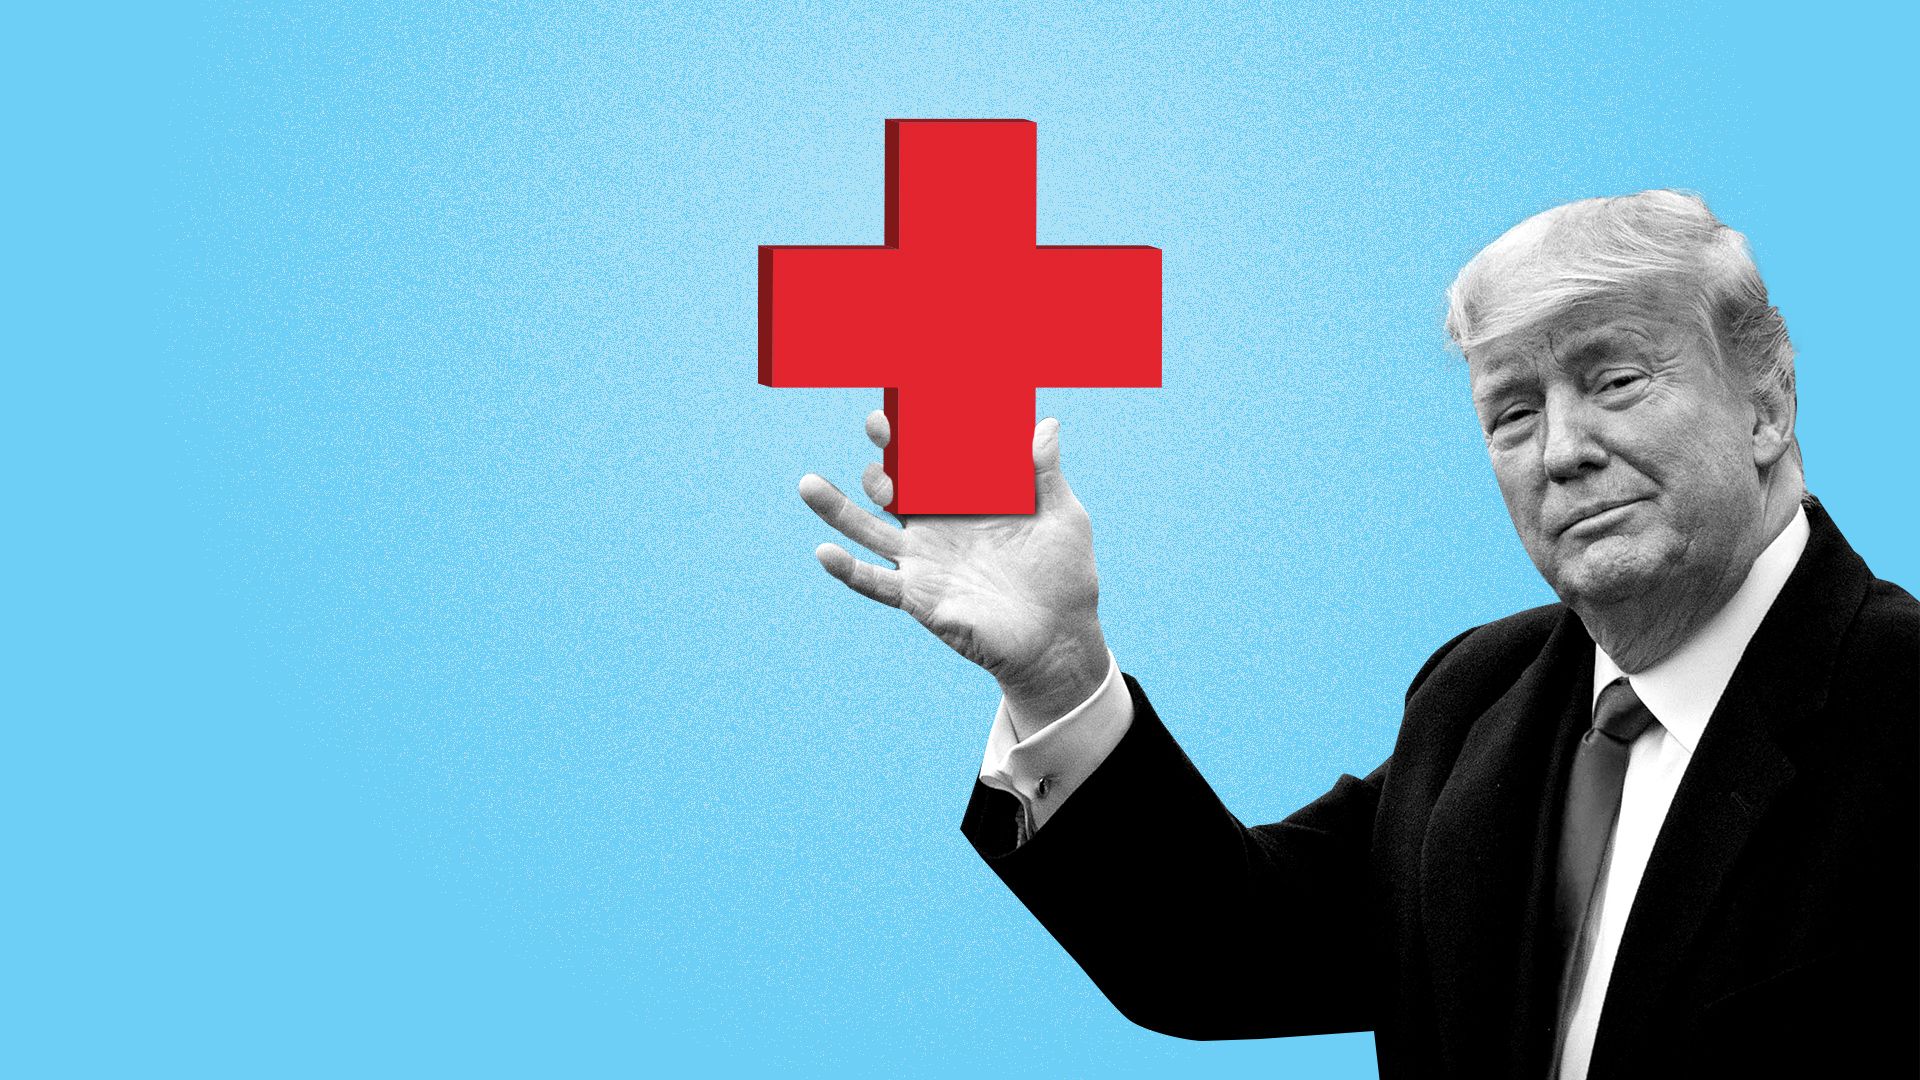 Illustration of President Trump holding up a health plus.